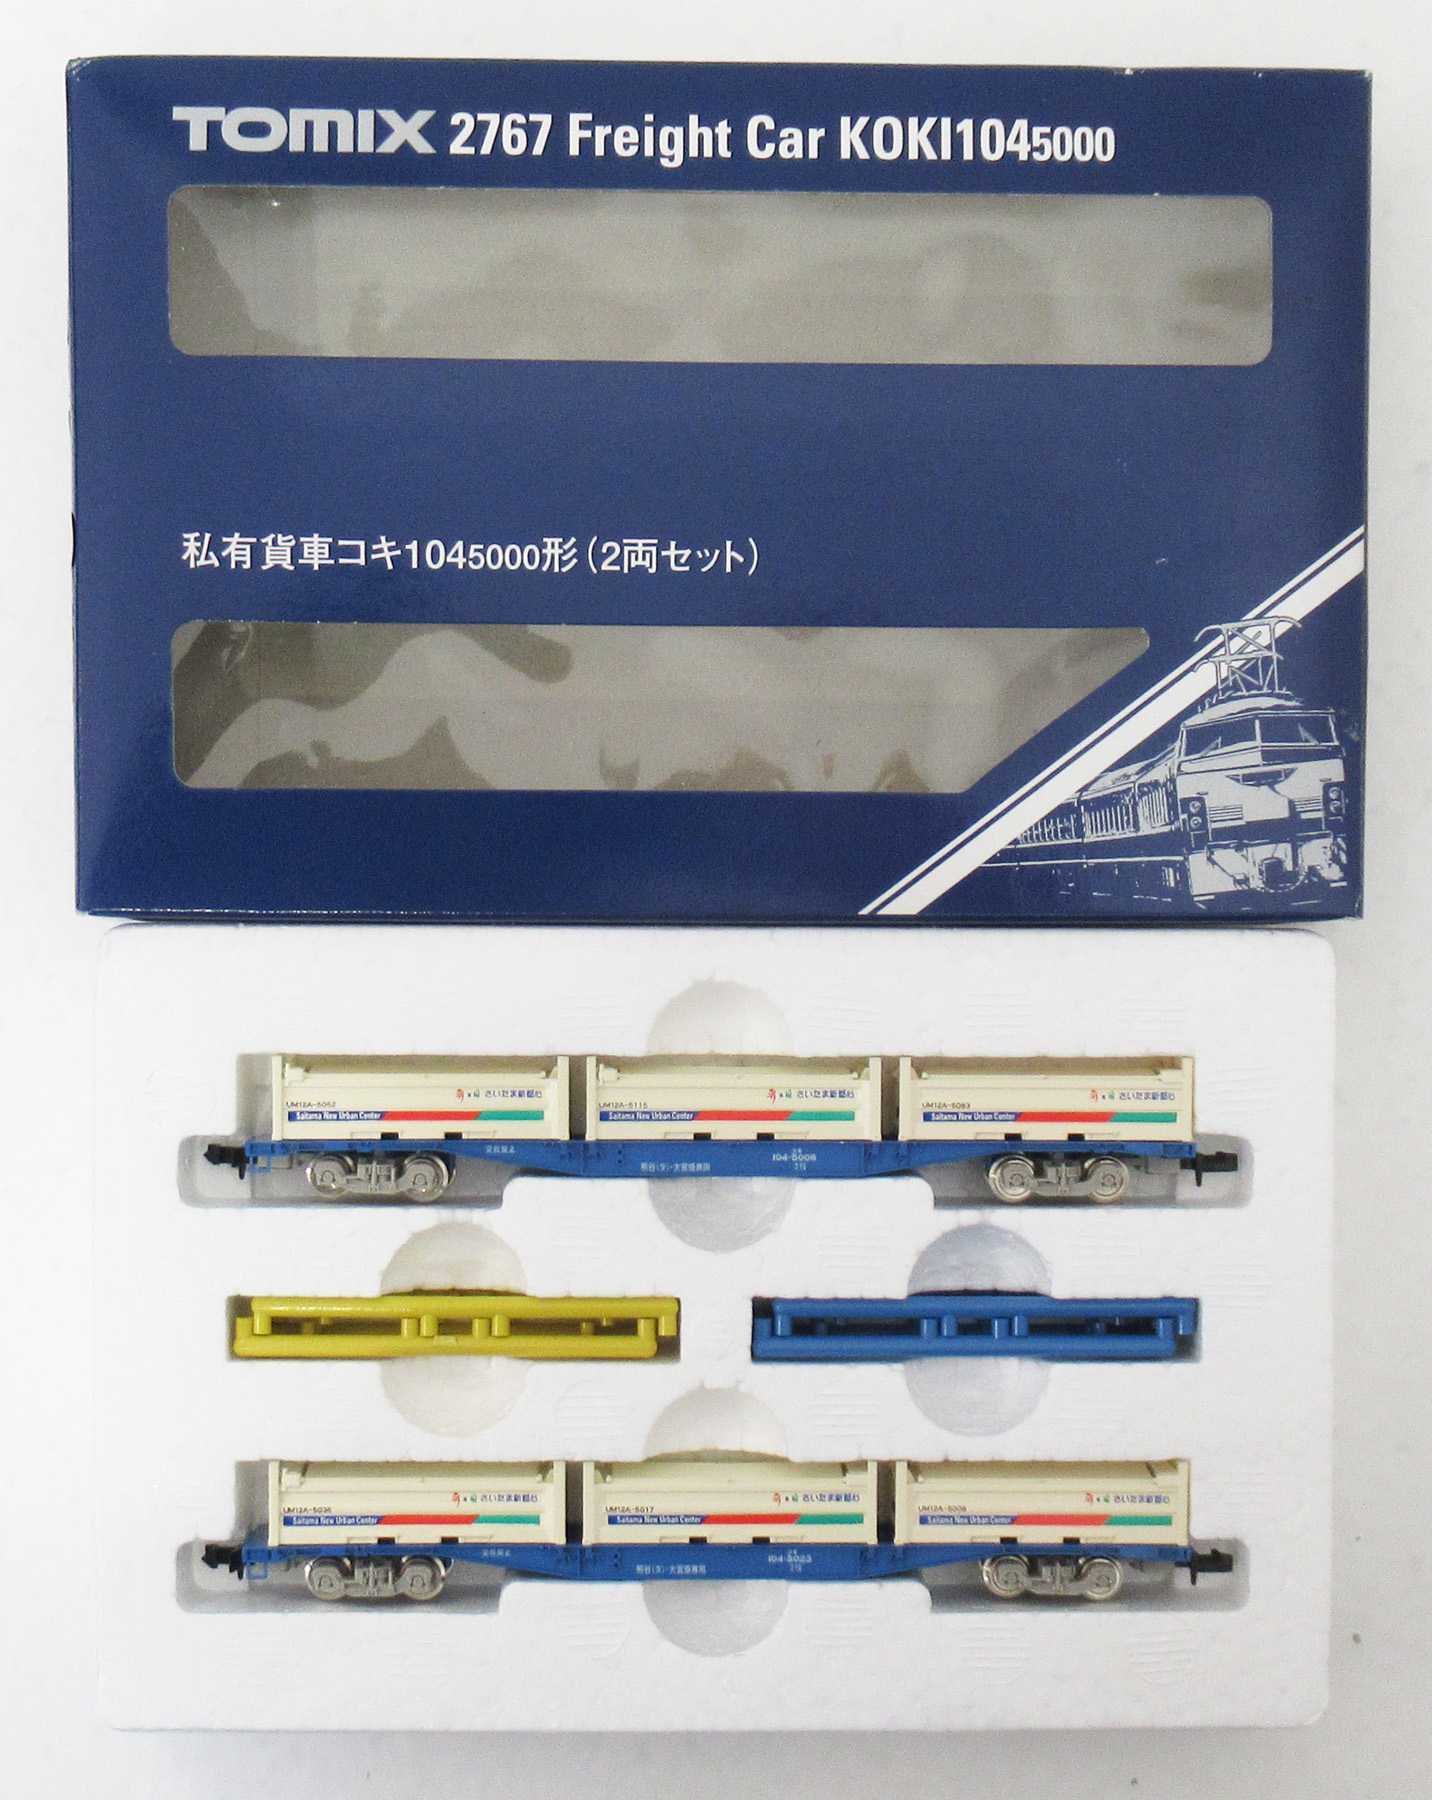 TOMIX コキ104 7両セット - 鉄道模型